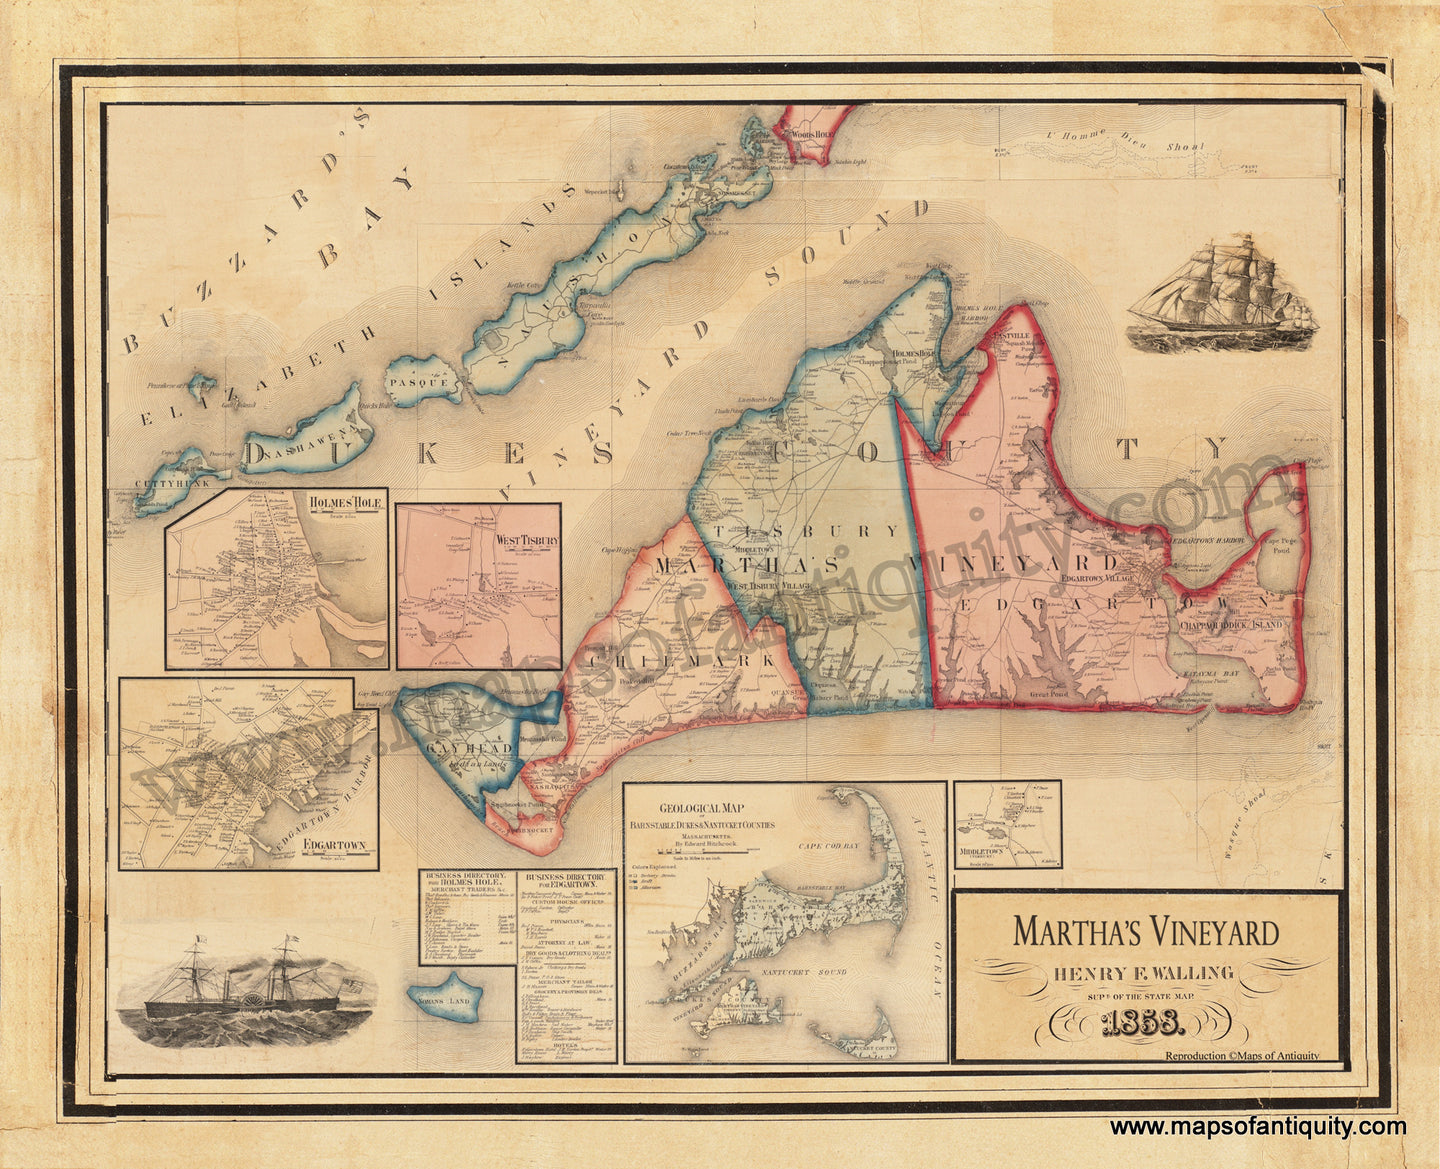 Reproduction-Martha's-Vineyard-1858-1800s-19th-century-Maps-of-Antiquity